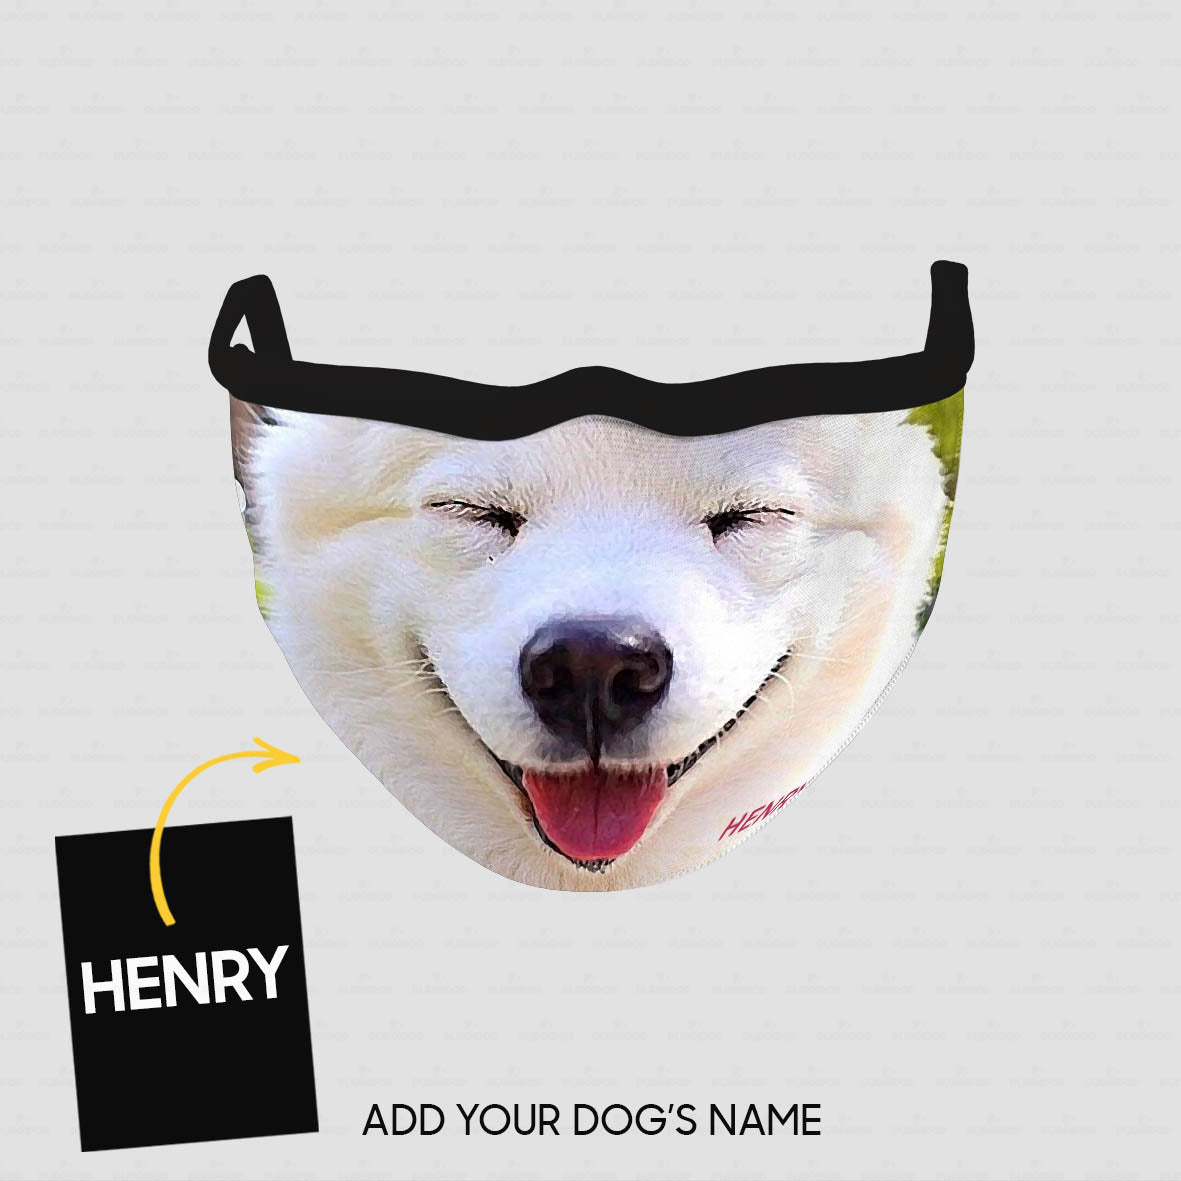 Personalized Dog Gift Idea - Samoyed The Whole Cute Face Smiling With Closed Eyes For Dog Lovers - Cloth Mask